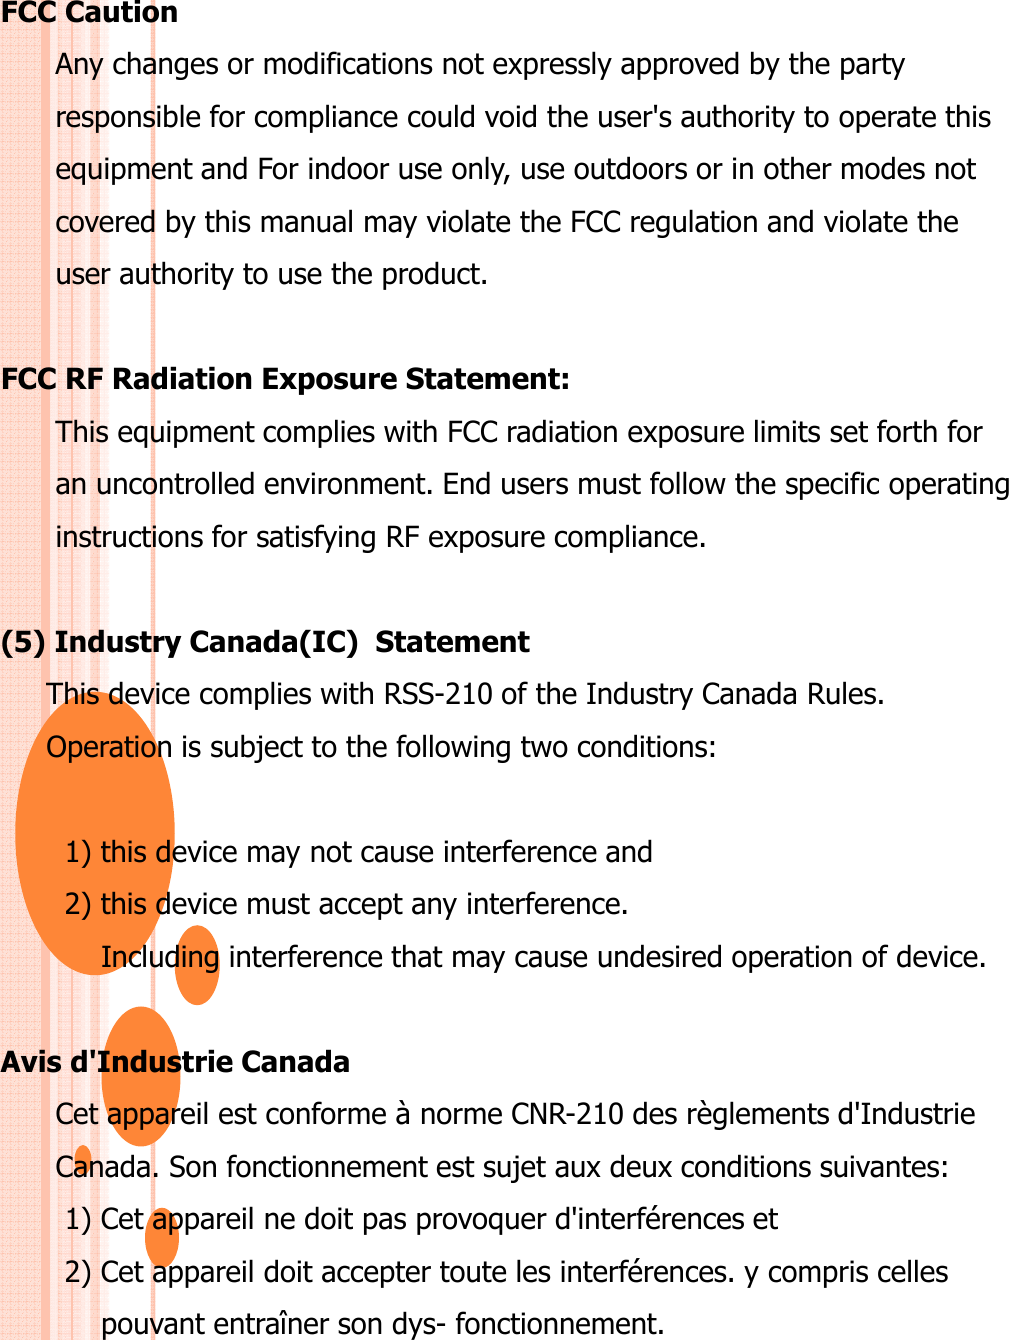 FCC CautionAny changes or modifications not expressly approved by the party responsible for compliance could void the user&apos;s authority to operate thisequipment and For indoor use only, use outdoors or in other modes notcovered by this manual may violate the FCC regulation and violate theuser authority to use the product.FCC RF Radiation Exposure Statement:This equipment complies with FCC radiation exposure limits set forth foran uncontrolled environment. End users must follow the specific operatinginstructions for satisfying RF exposure compliance.(5) Industry Canada(IC)  StatementThis device complies with RSS-210 of the Industry Canada Rules.Operation is subject to the following two conditions:1) this device may not cause interference and2) this device must accept any interference. Including interference that may cause undesired operation of device.Avis d&apos;Industrie CanadaCet appareil est conforme à norme CNR-210 des règlements d&apos;Industrie Canada. Son fonctionnement est sujet aux deux conditions suivantes:1) Cet appareil ne doit pas provoquer d&apos;interférences et2) Cet appareil doit accepter toute les interférences. y compris celles pouvant entraîner son dys- fonctionnement.